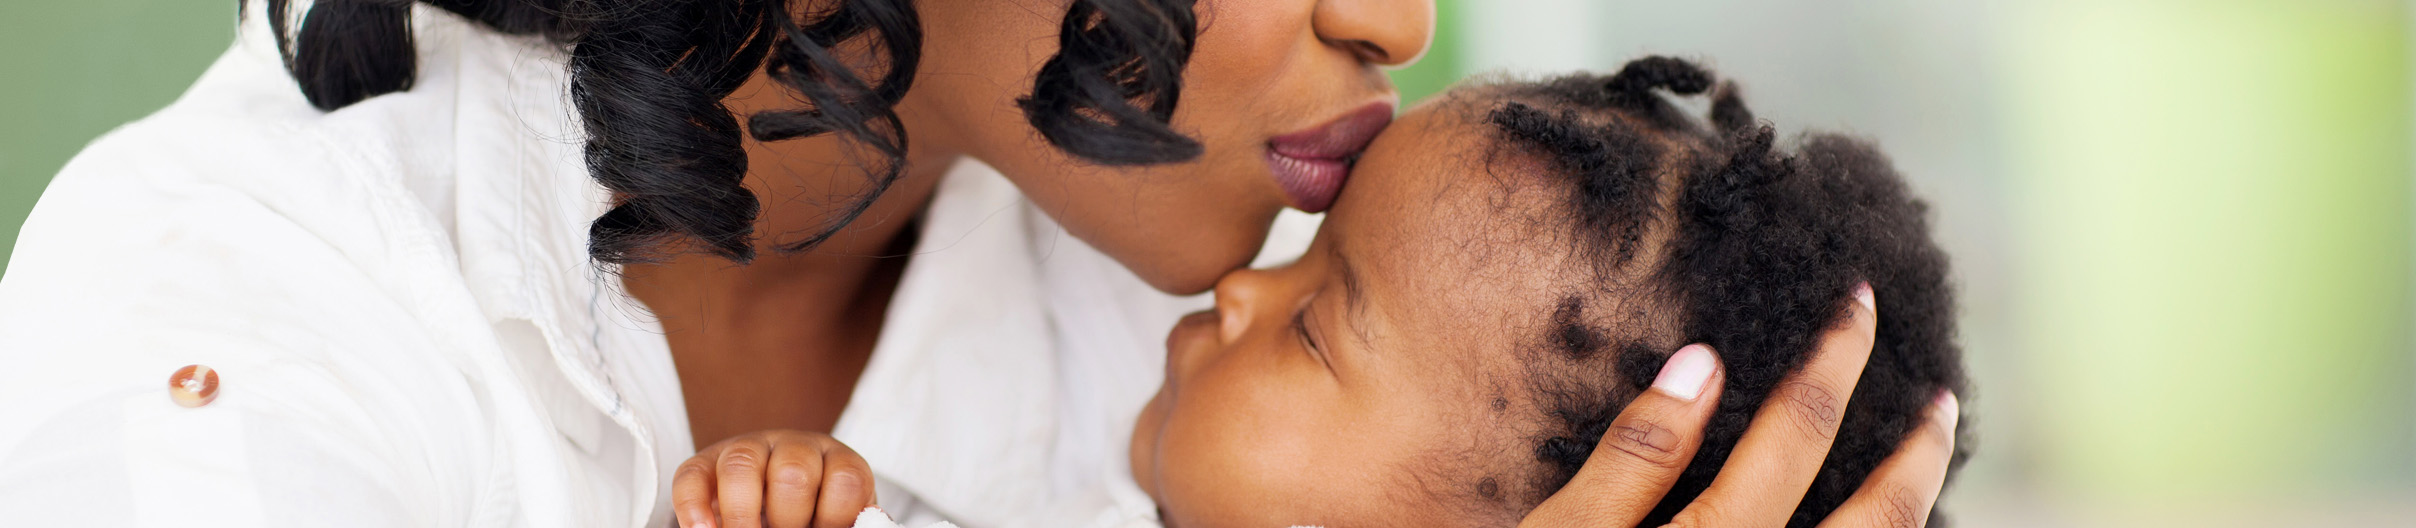 Mother kissing baby on forehead